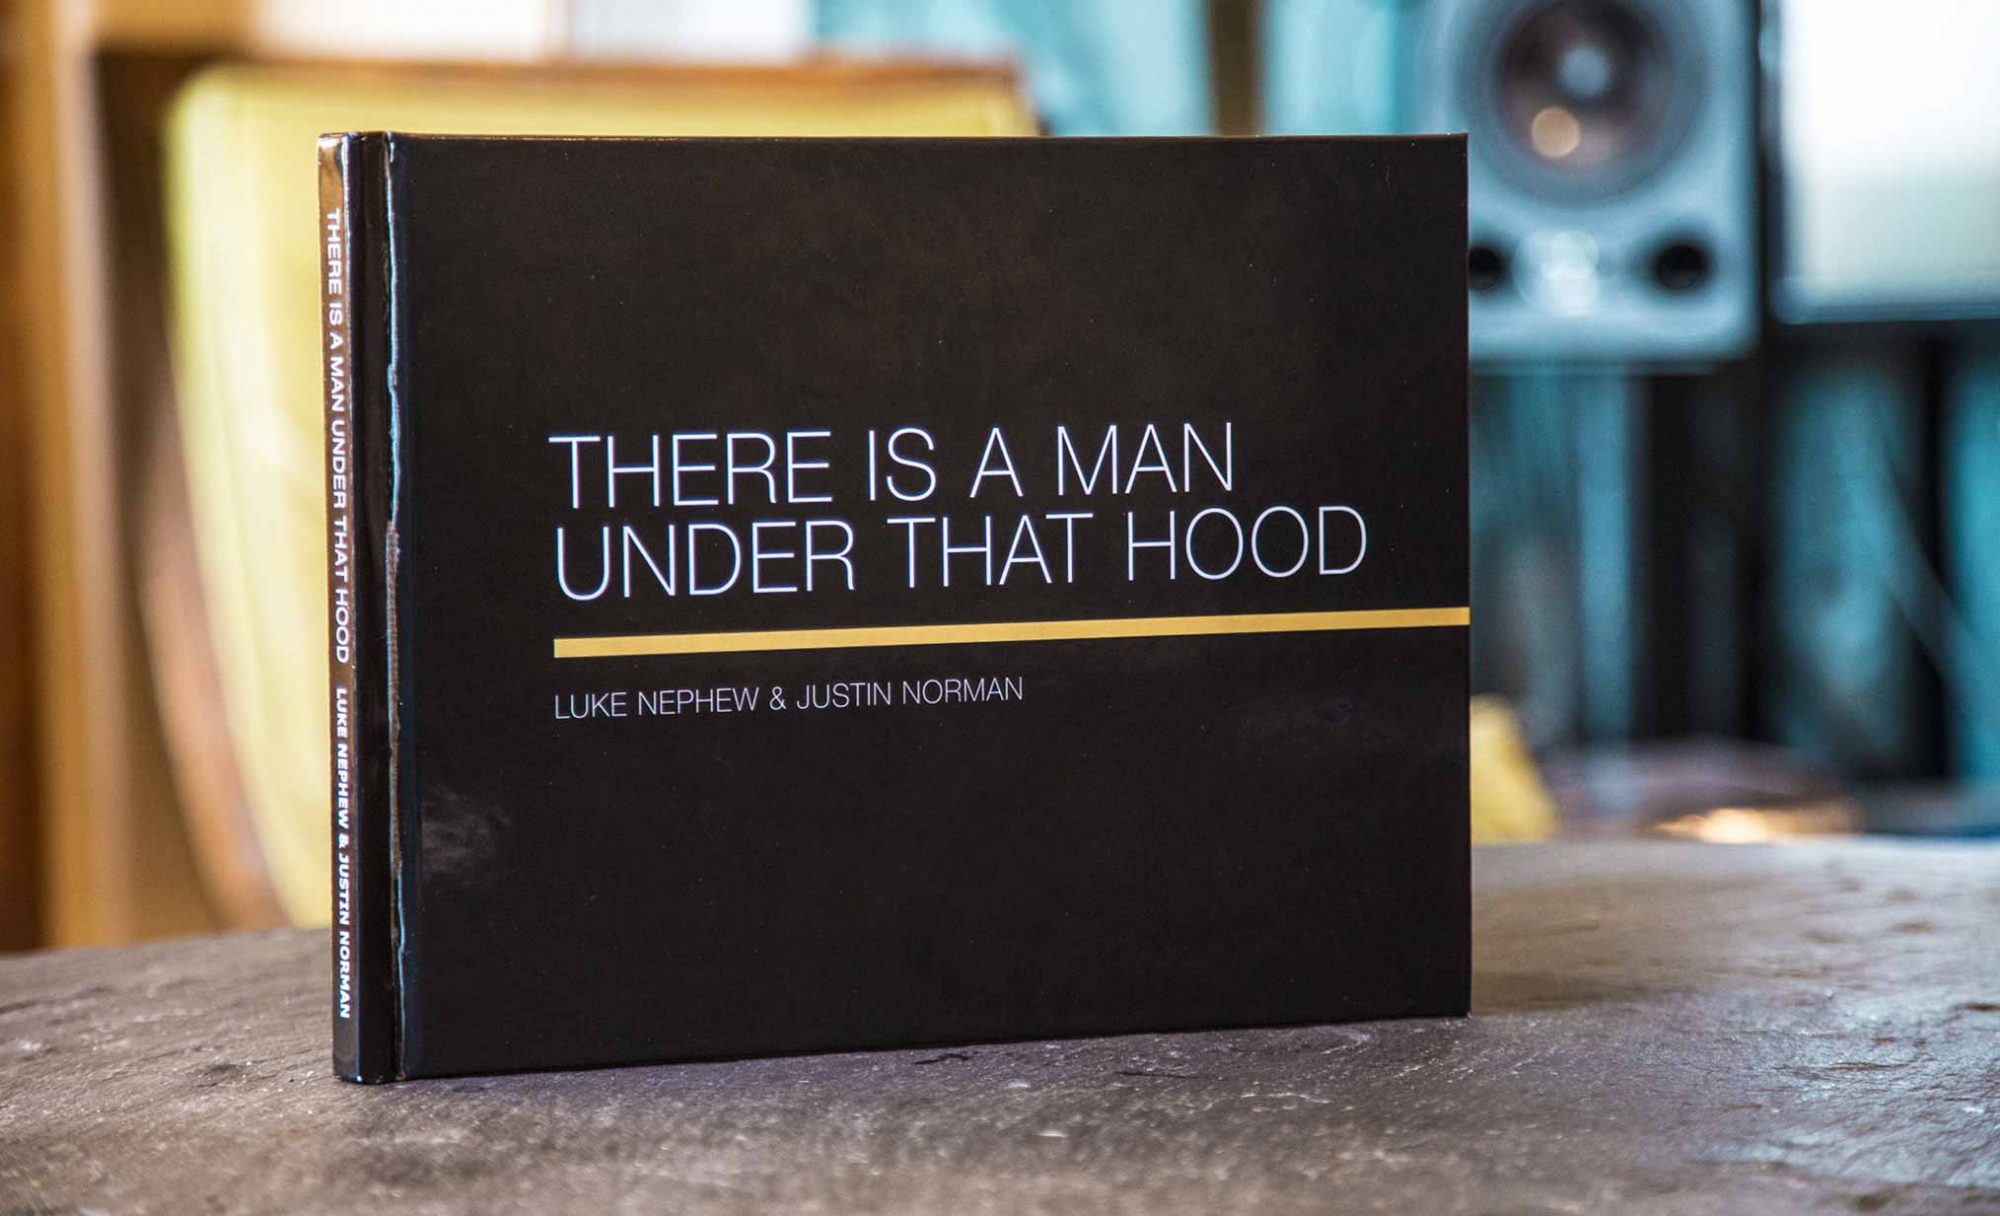 There Is a Man Under That Hood - Luke Nephew & Justin Norman